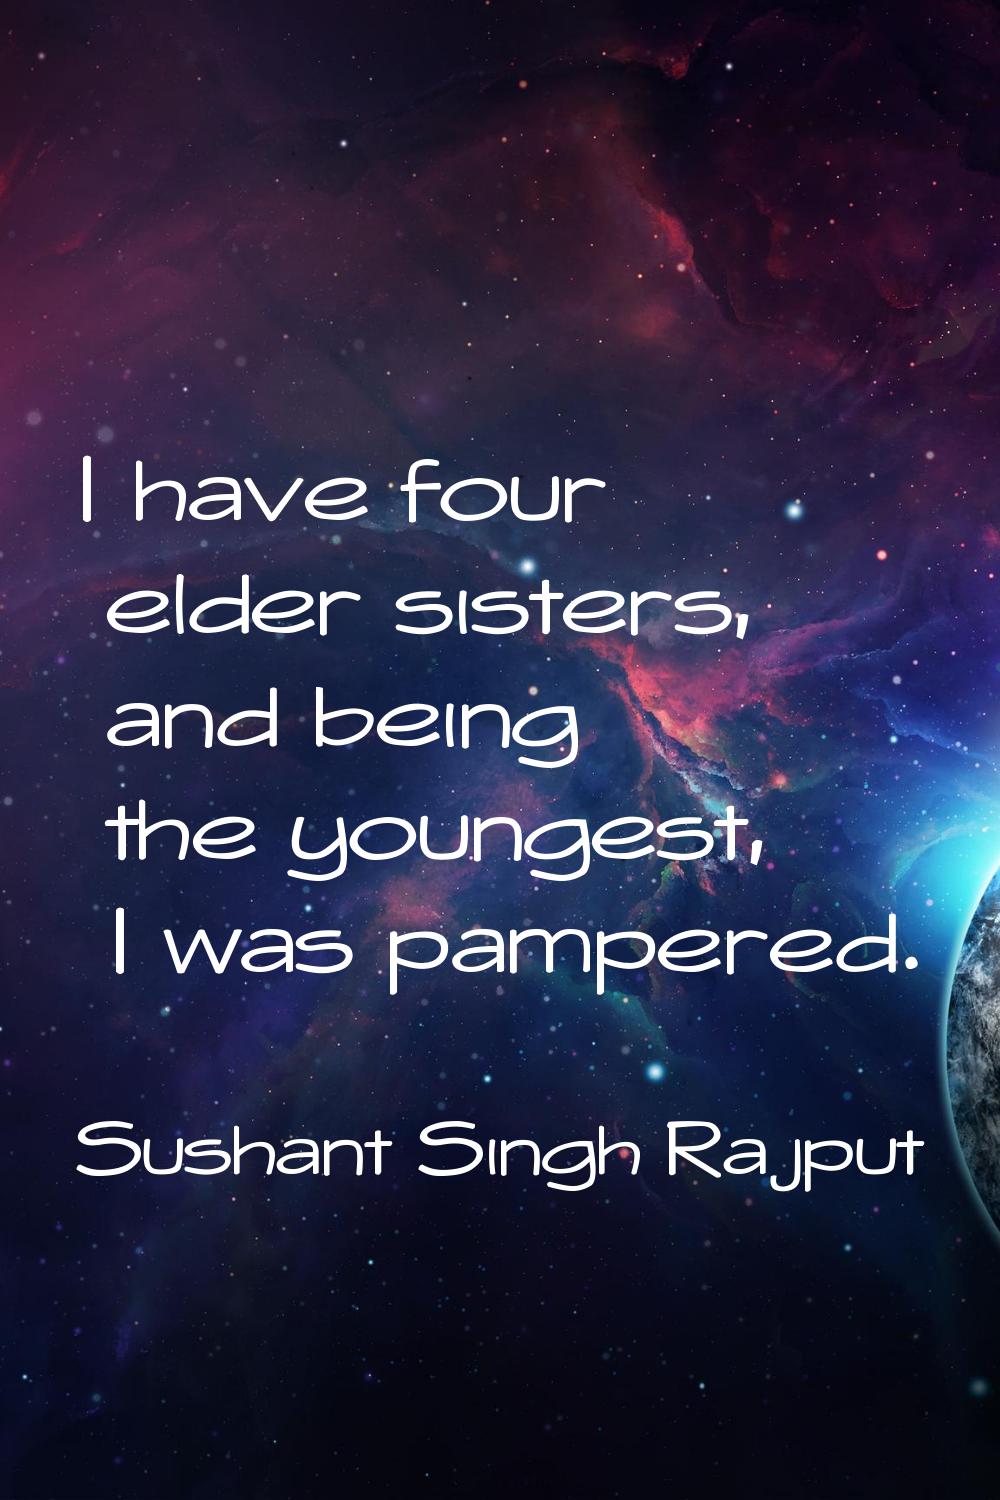 I have four elder sisters, and being the youngest, I was pampered.